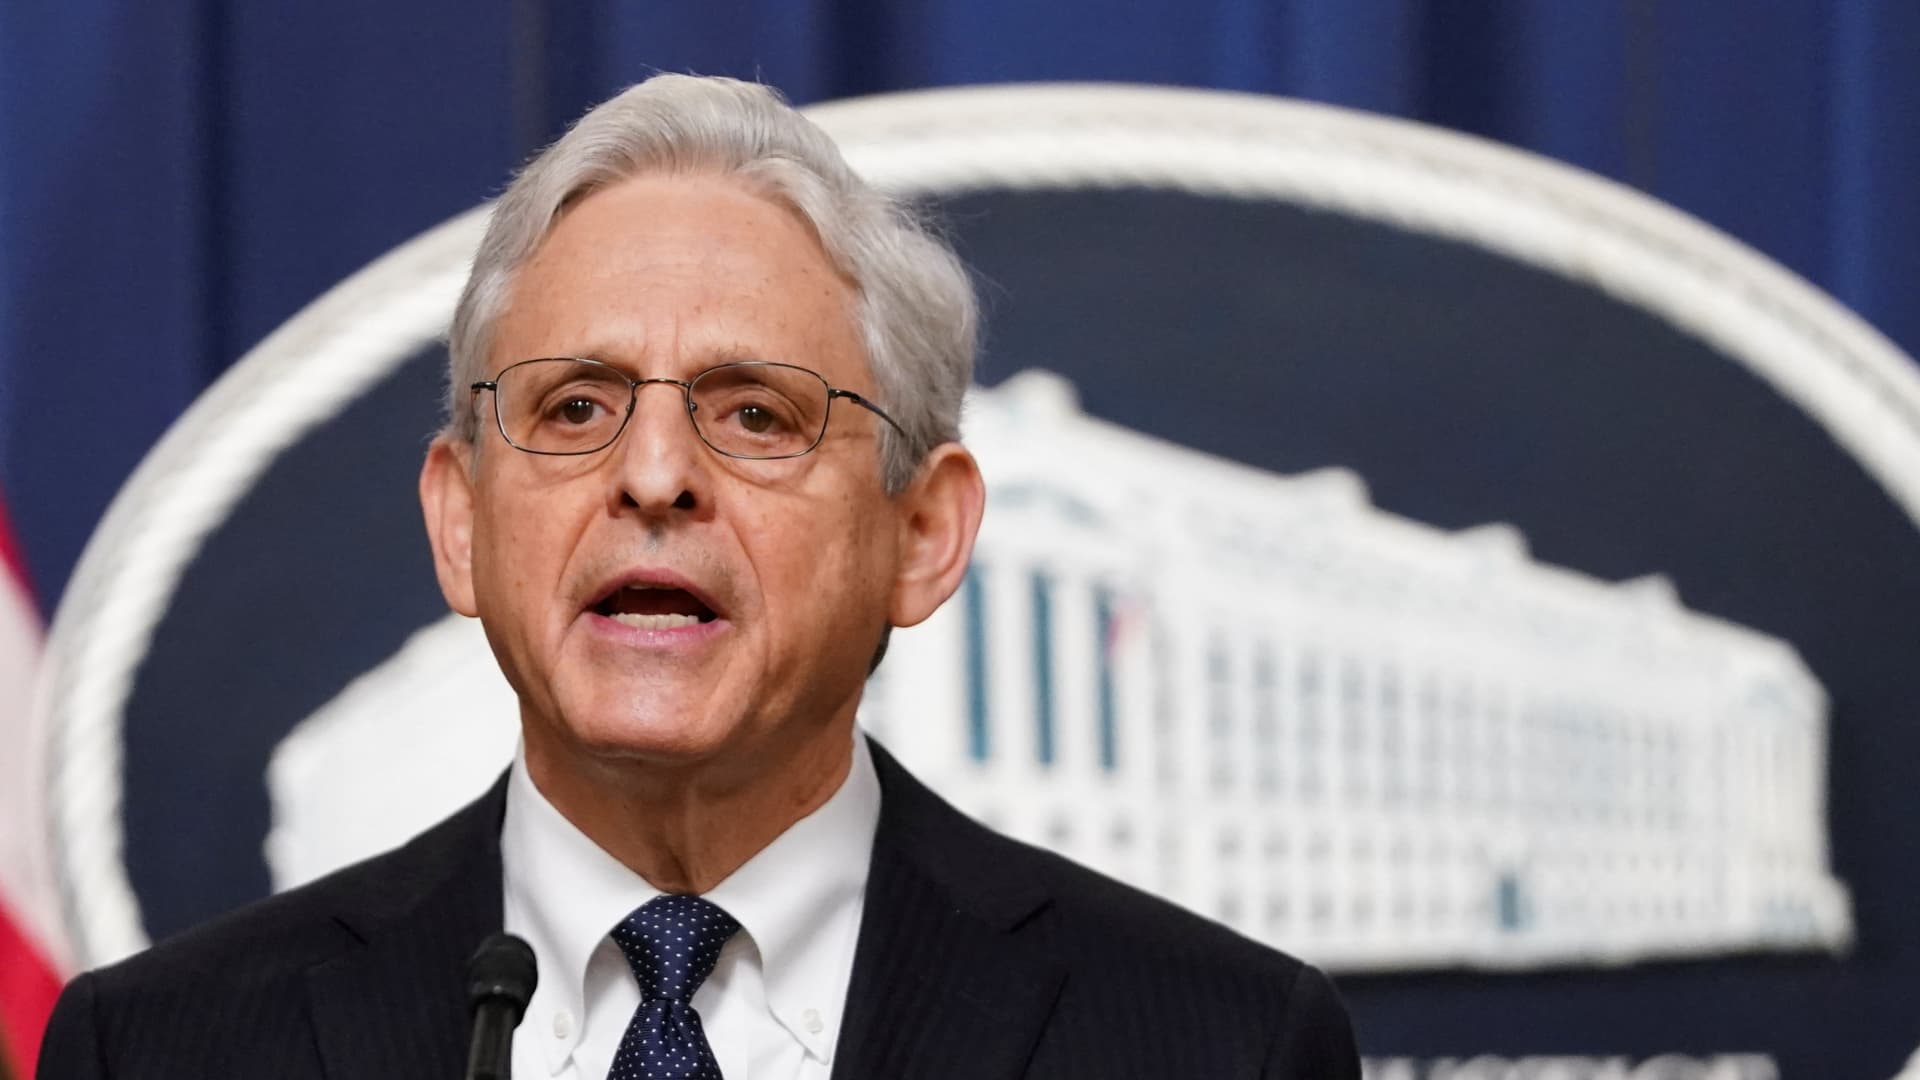 U.S. Attorney General Merrick Garland speaks to reporters after a jury convicted four members of the far-right Proud Boys militia group including its former leader Enrique Tarrio of seditious conspiracy, in connection with the Jan. 6 attack on the U.S. Capitol, as Deputy Attorney General Lisa Monaco stands by during a brief news conference at the Justice Department in Washington, May 4, 2023.